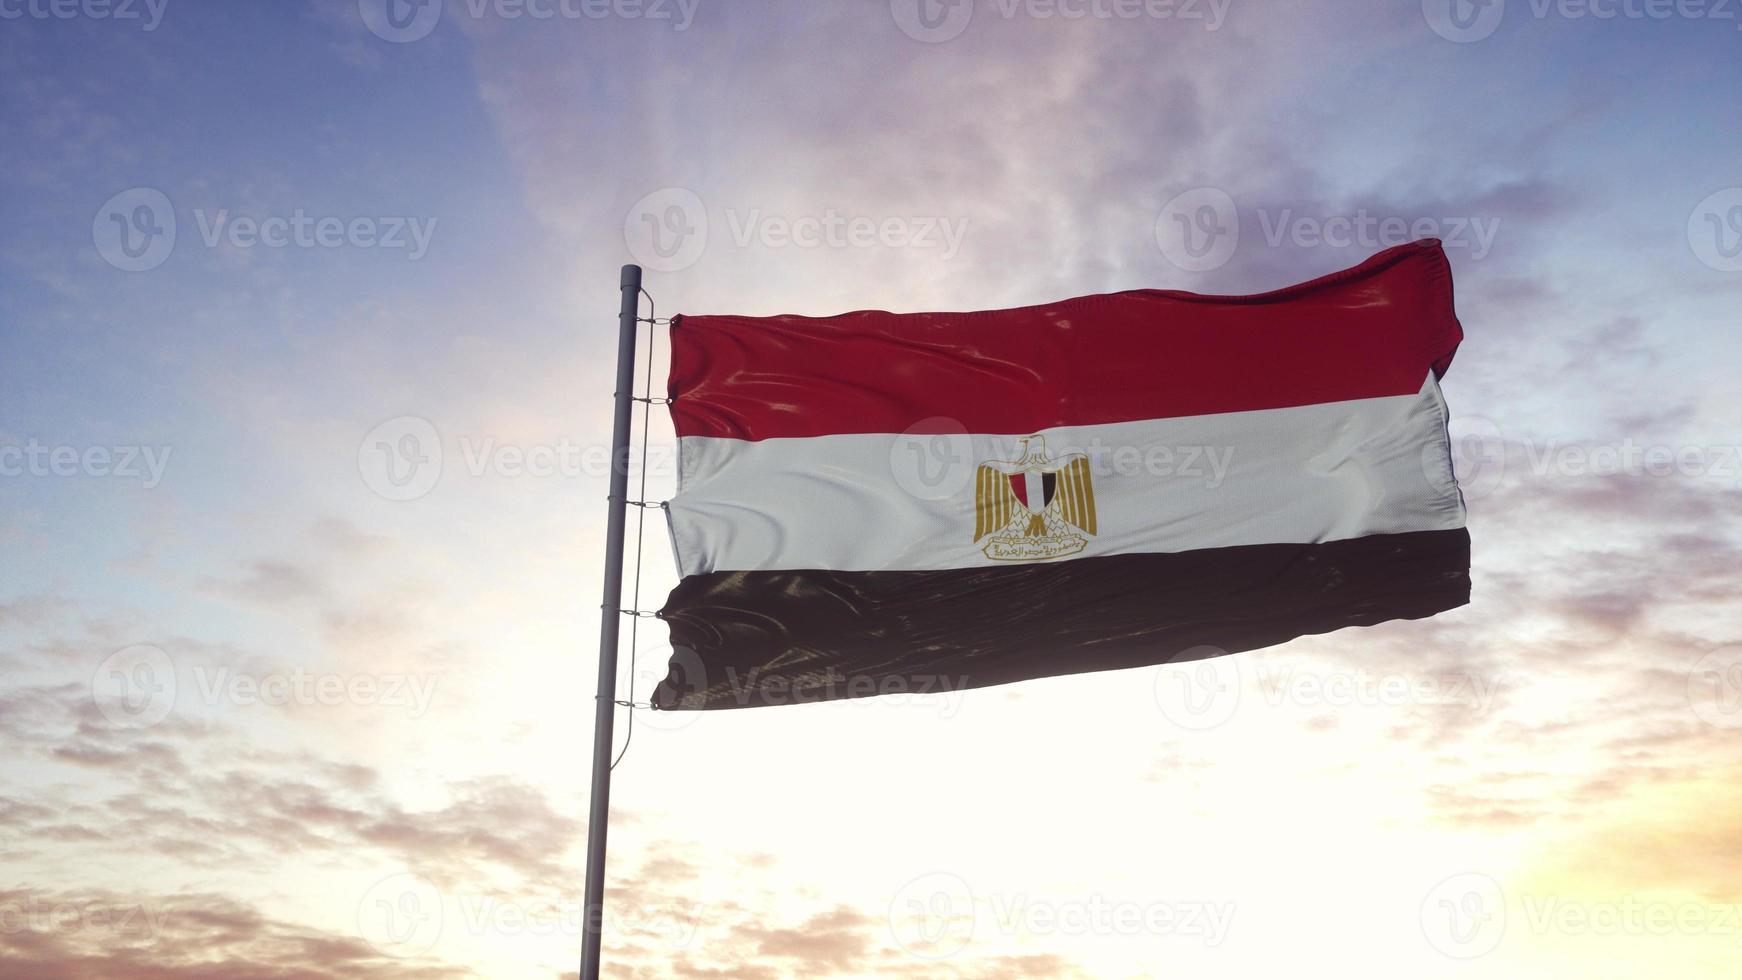 Egypt flag waving in the wind, dramatic sky background. 3d illustration photo